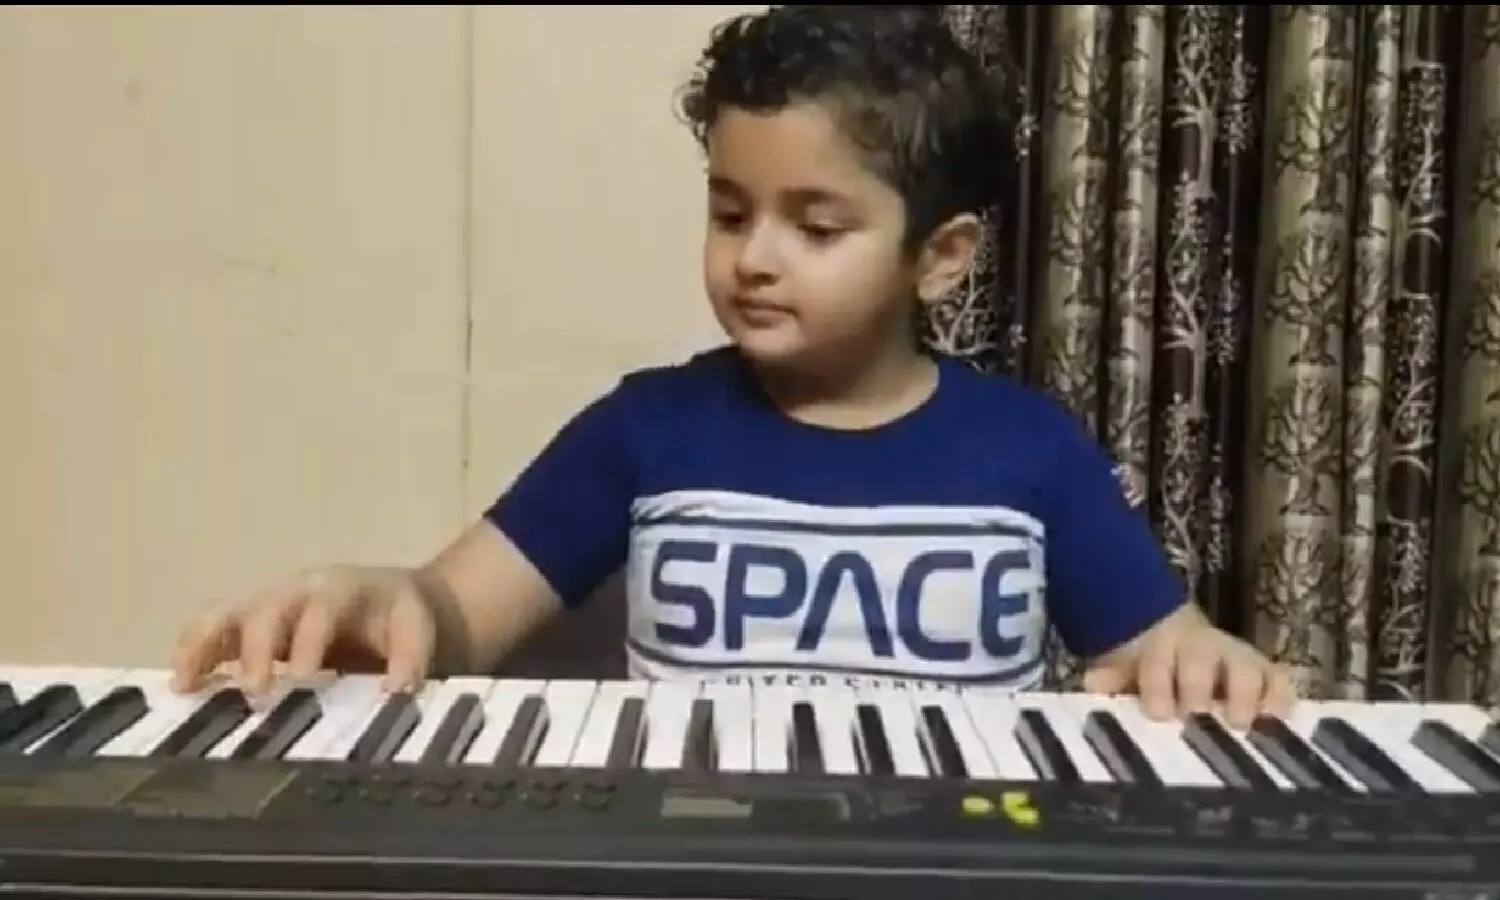 Atharva Singh These days a video of a small child is becoming increasingly viral on social media.